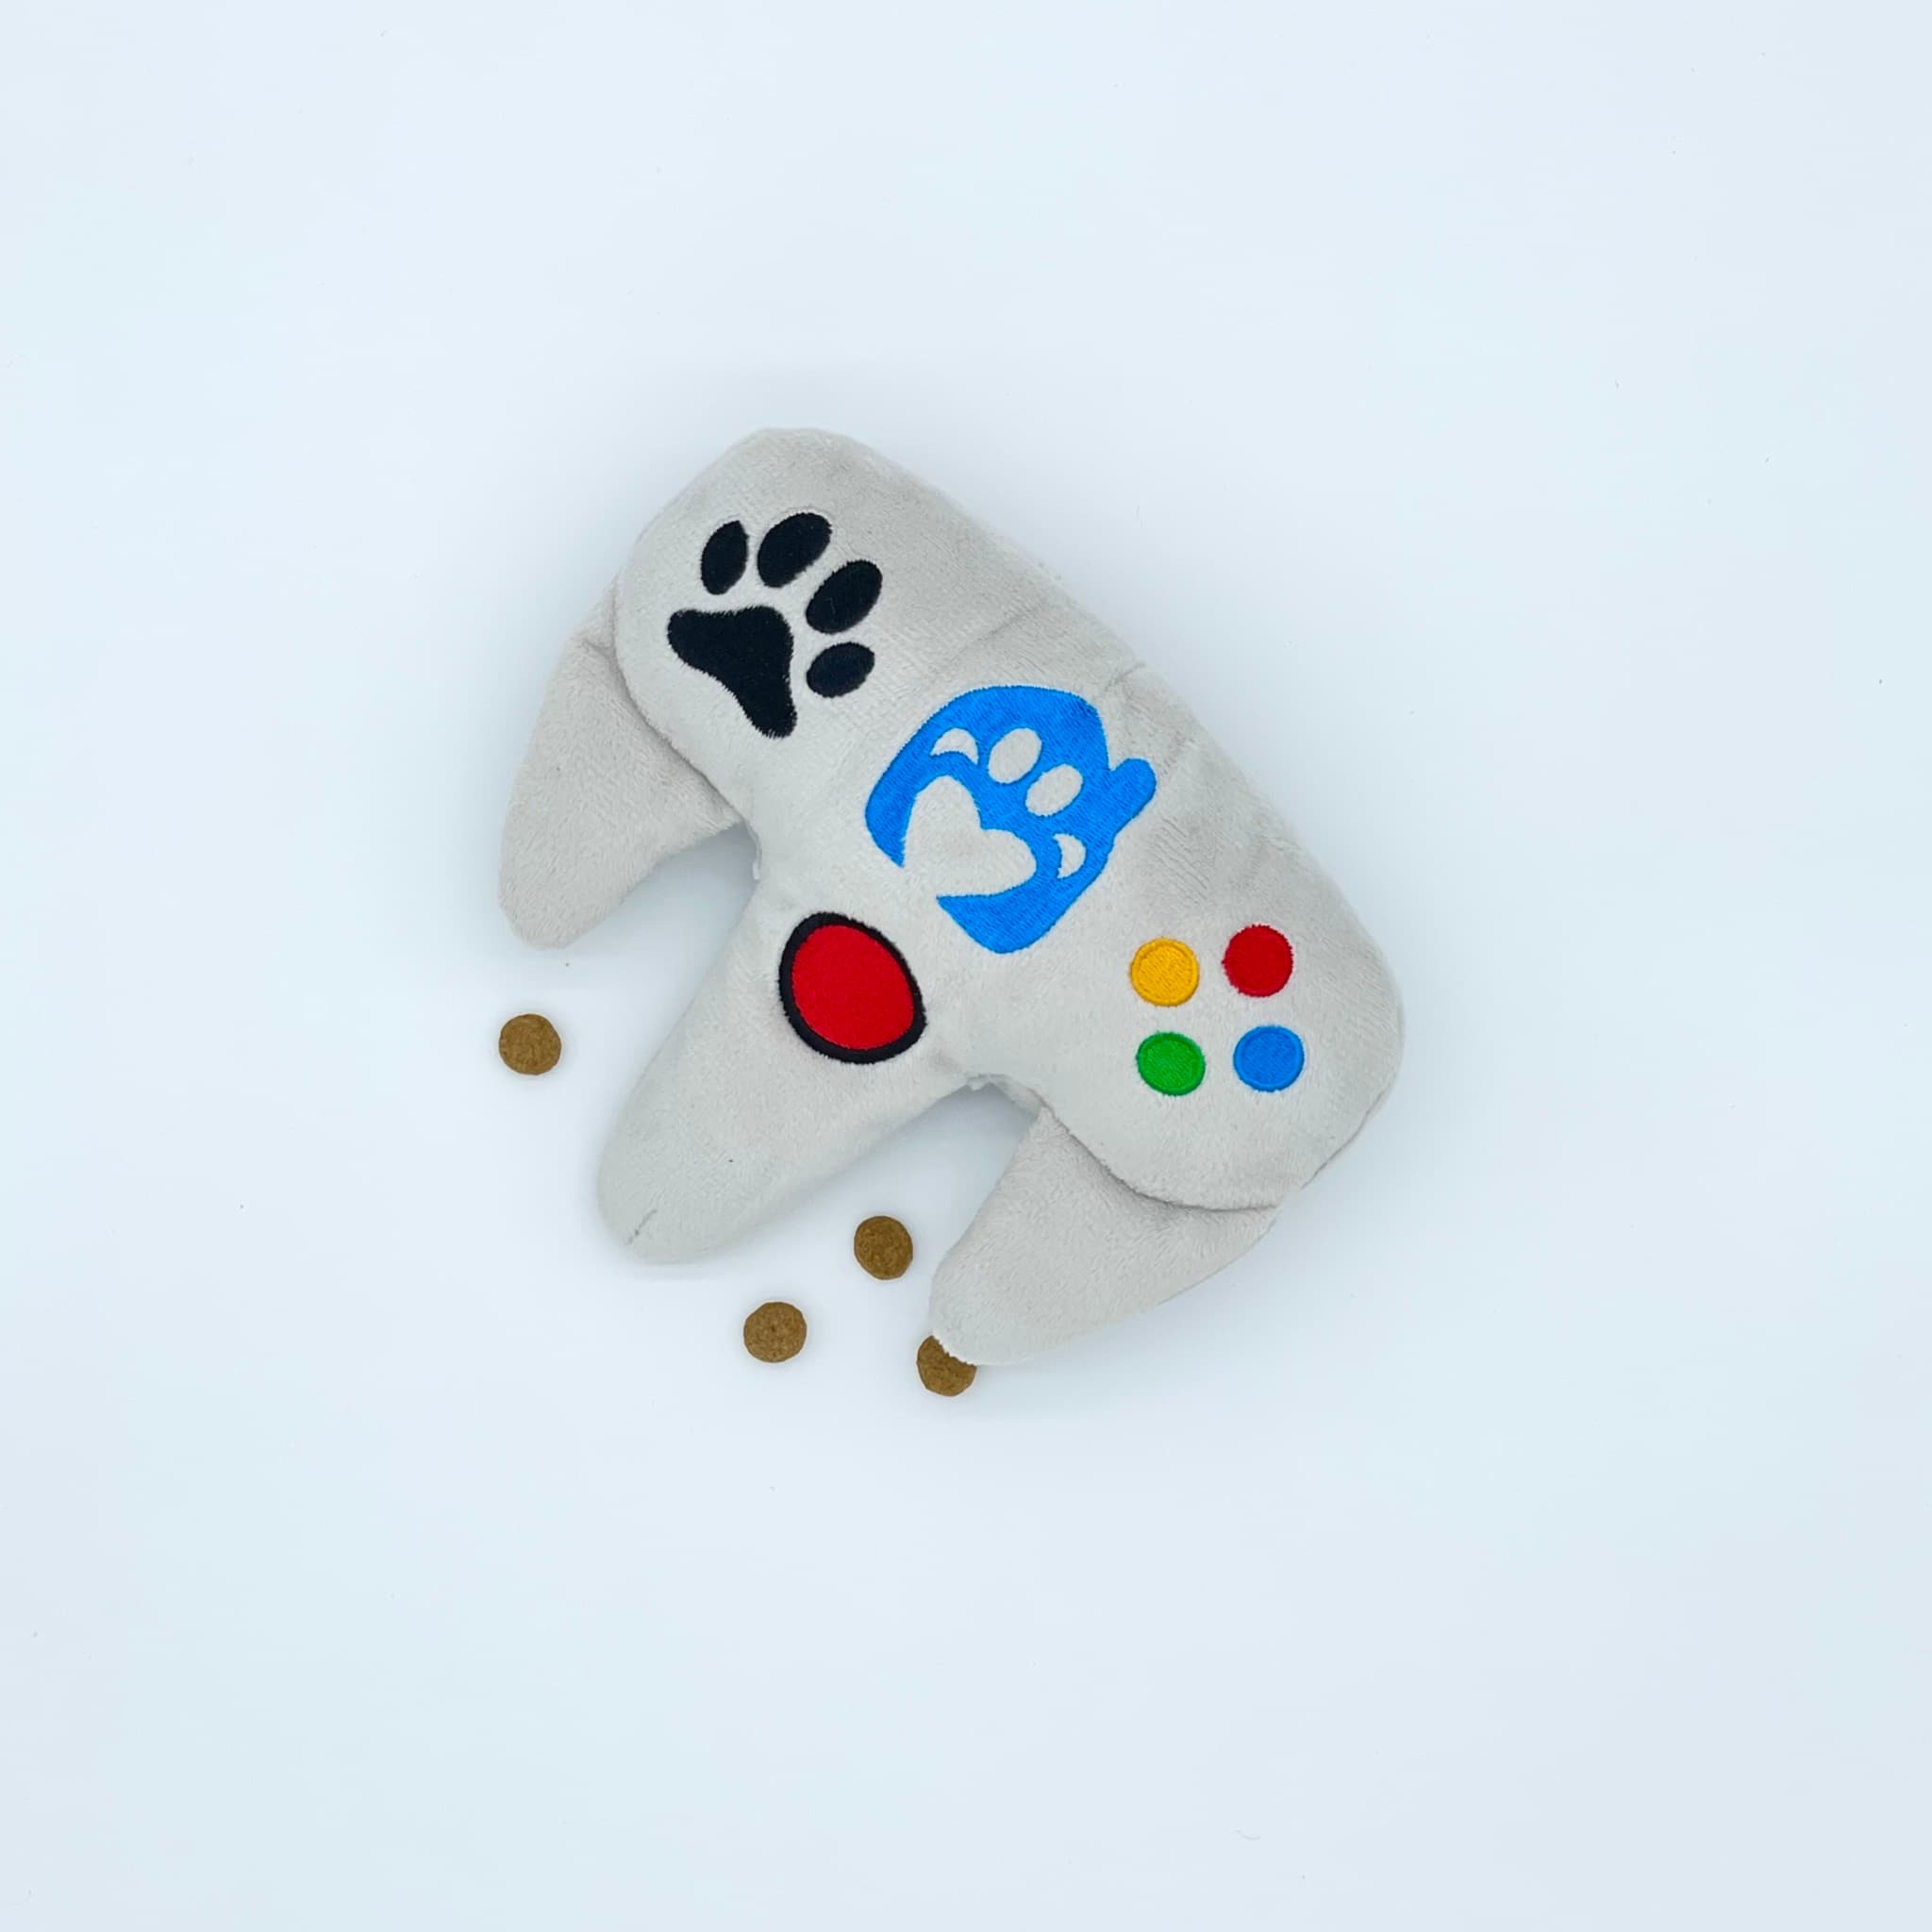 DuraPaw Exclusive Game Controller